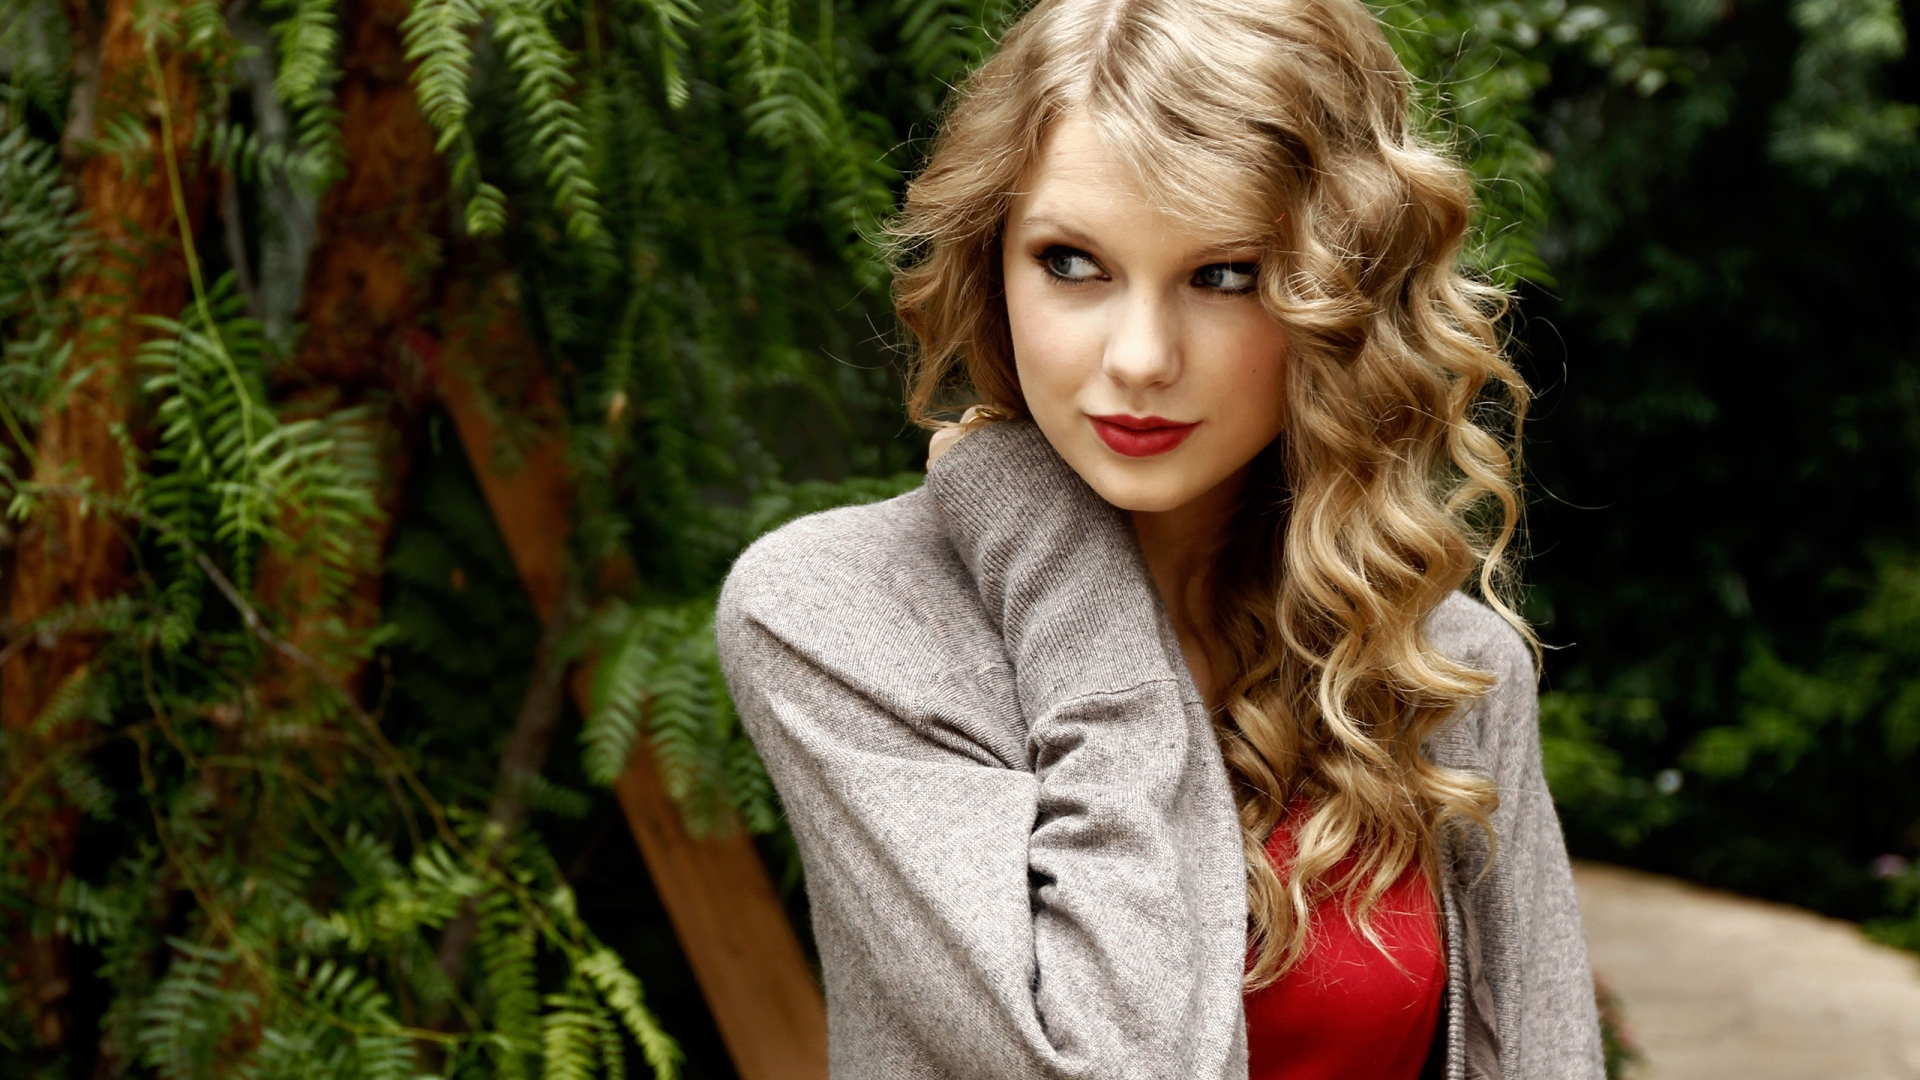 Smiling Taylor Swift Actress for 1920 x 1080 HDTV 1080p resolution